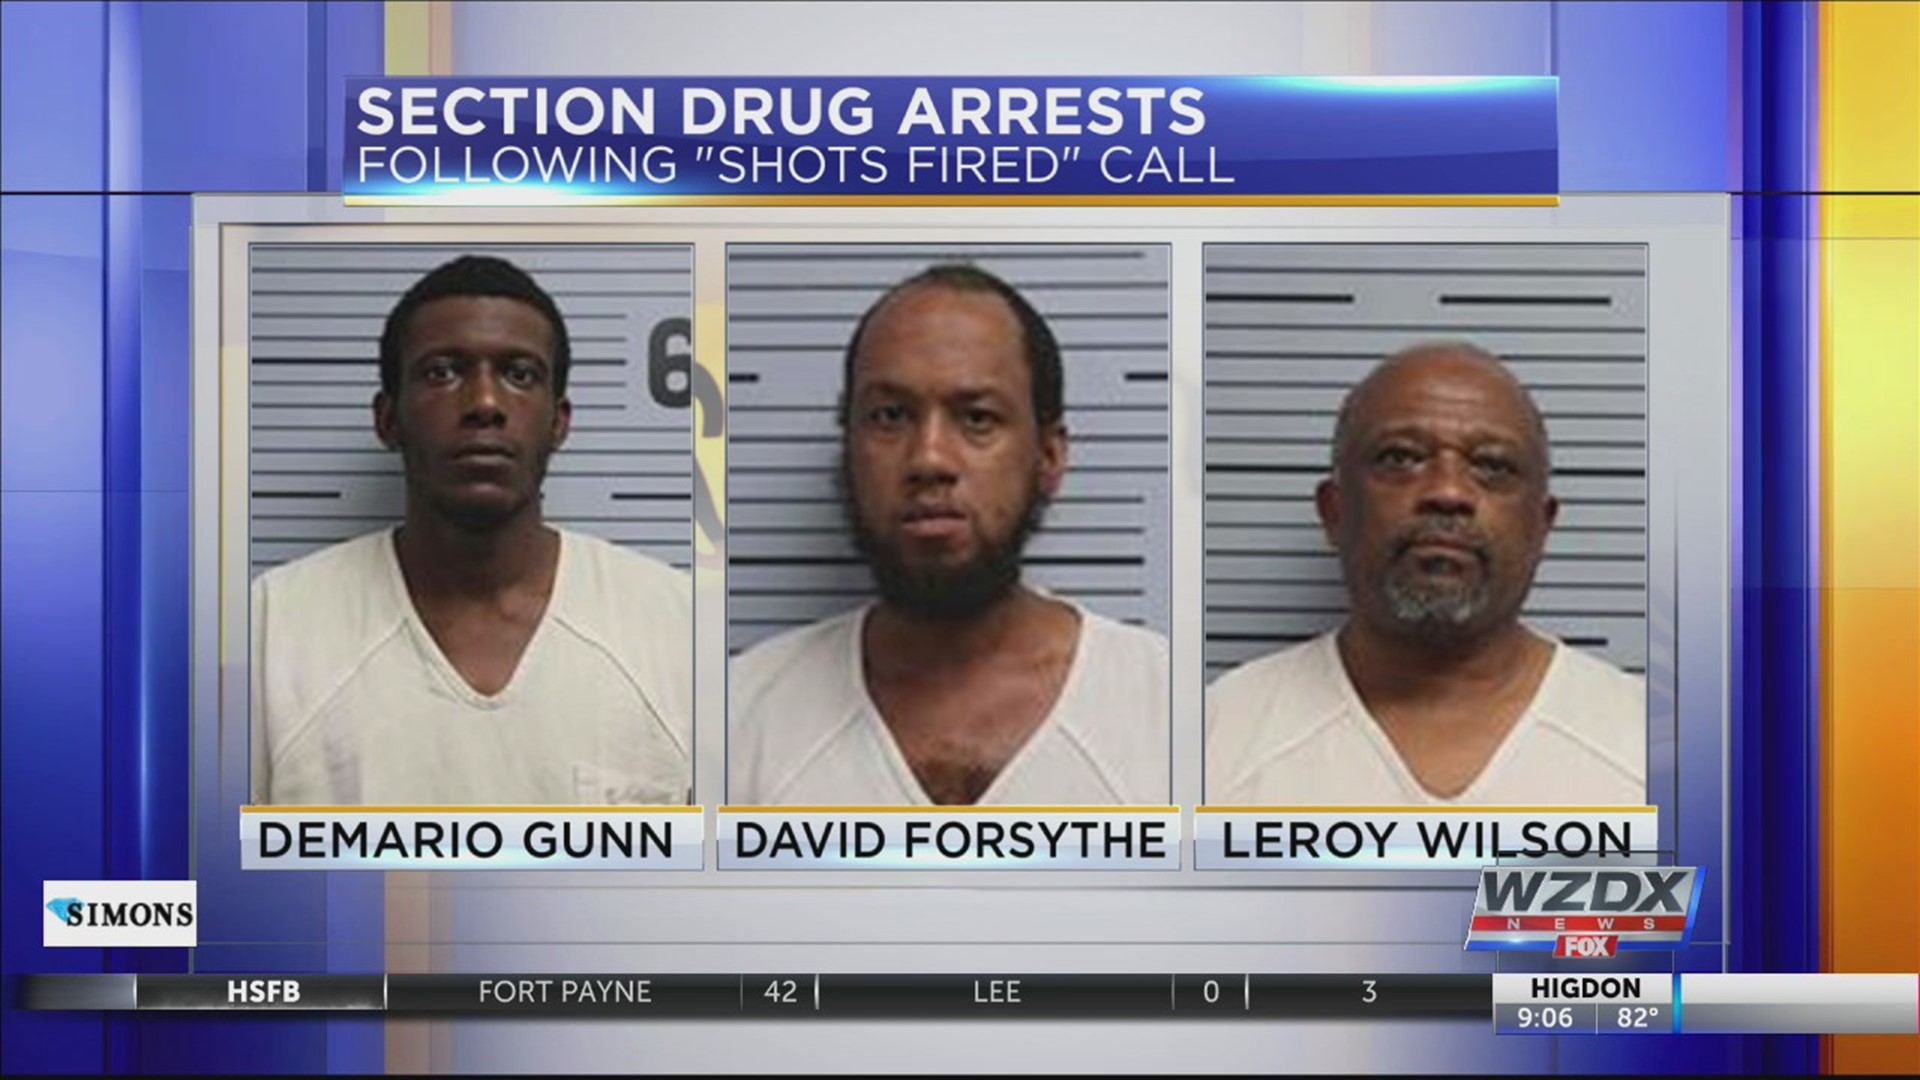 A "shots fired call" in Jackson County led to multiple drug arrests Thursday.